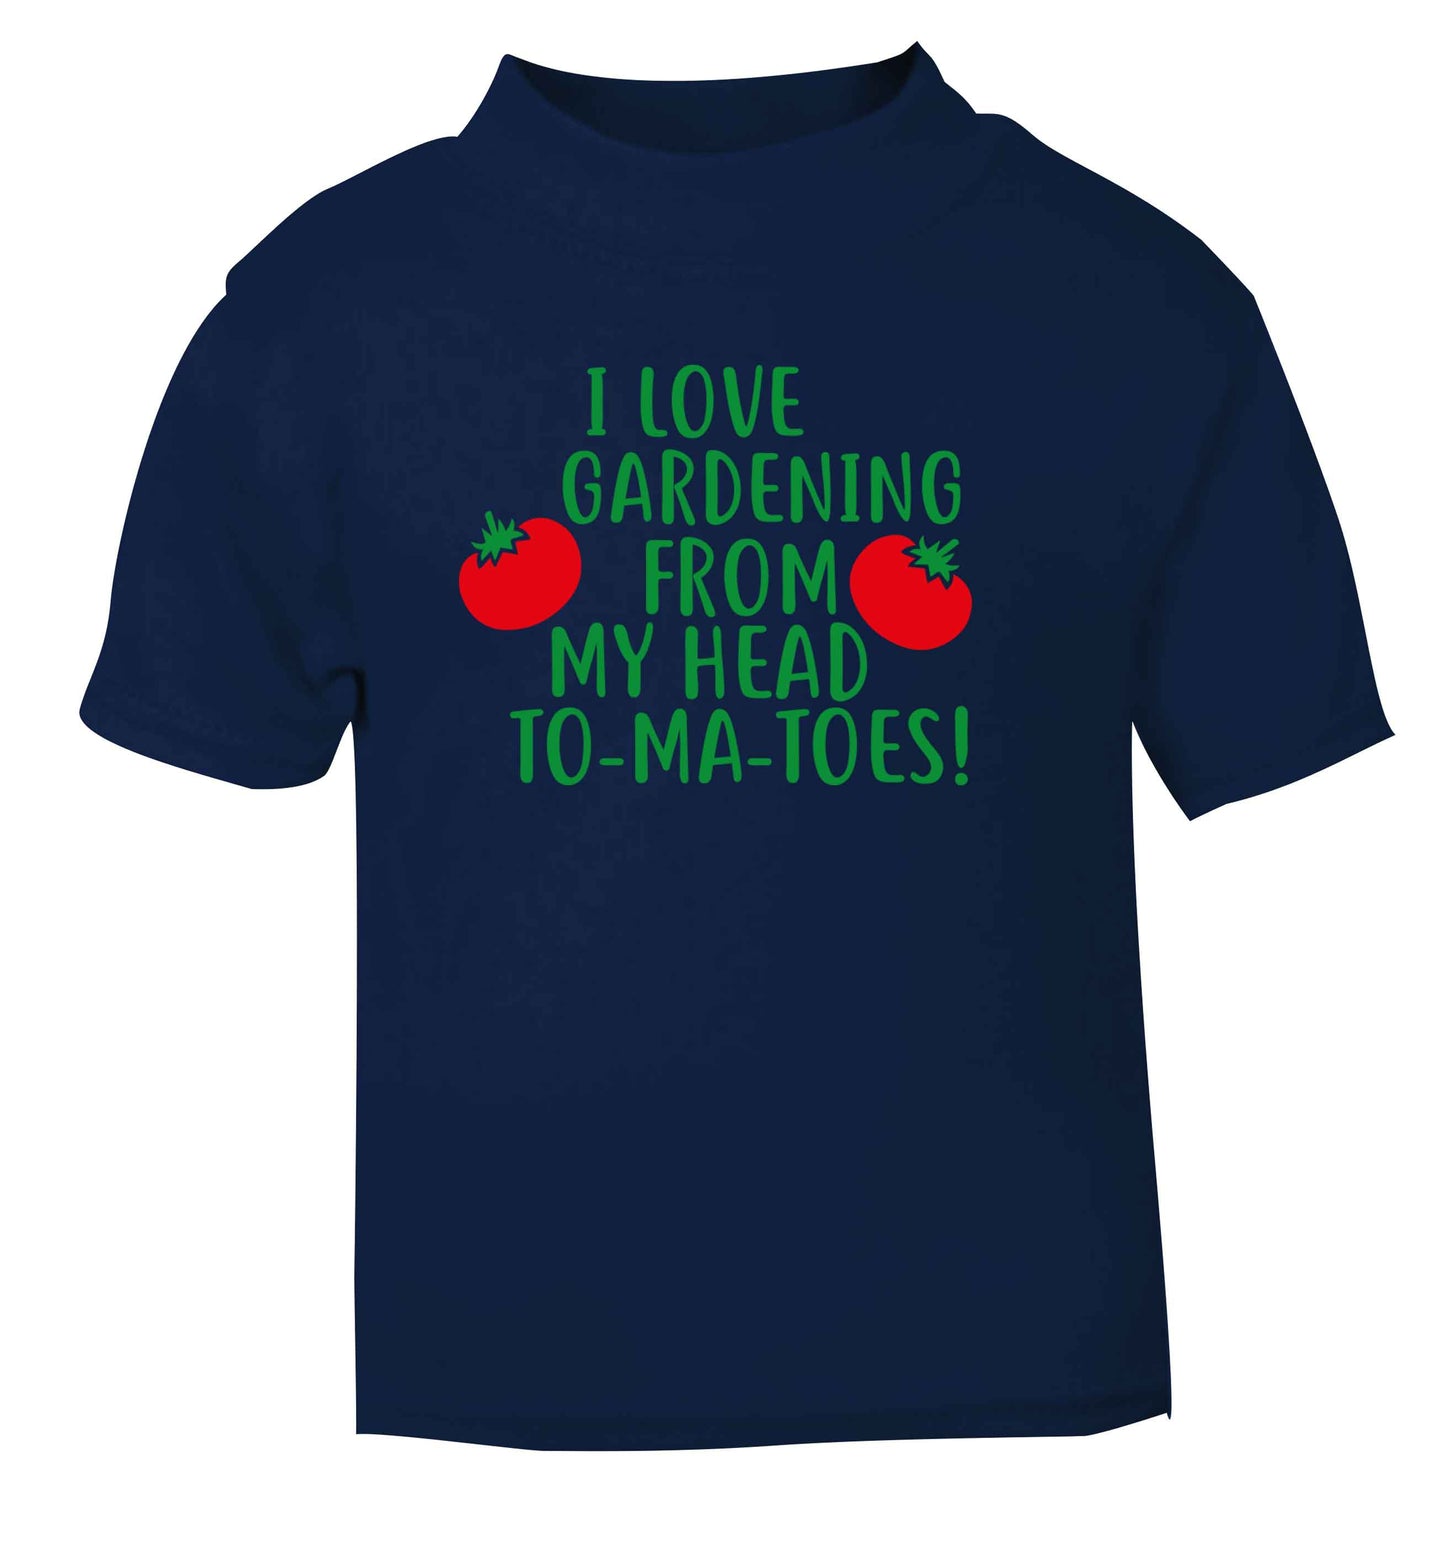 I love gardening from my head to-ma-toes navy Baby Toddler Tshirt 2 Years